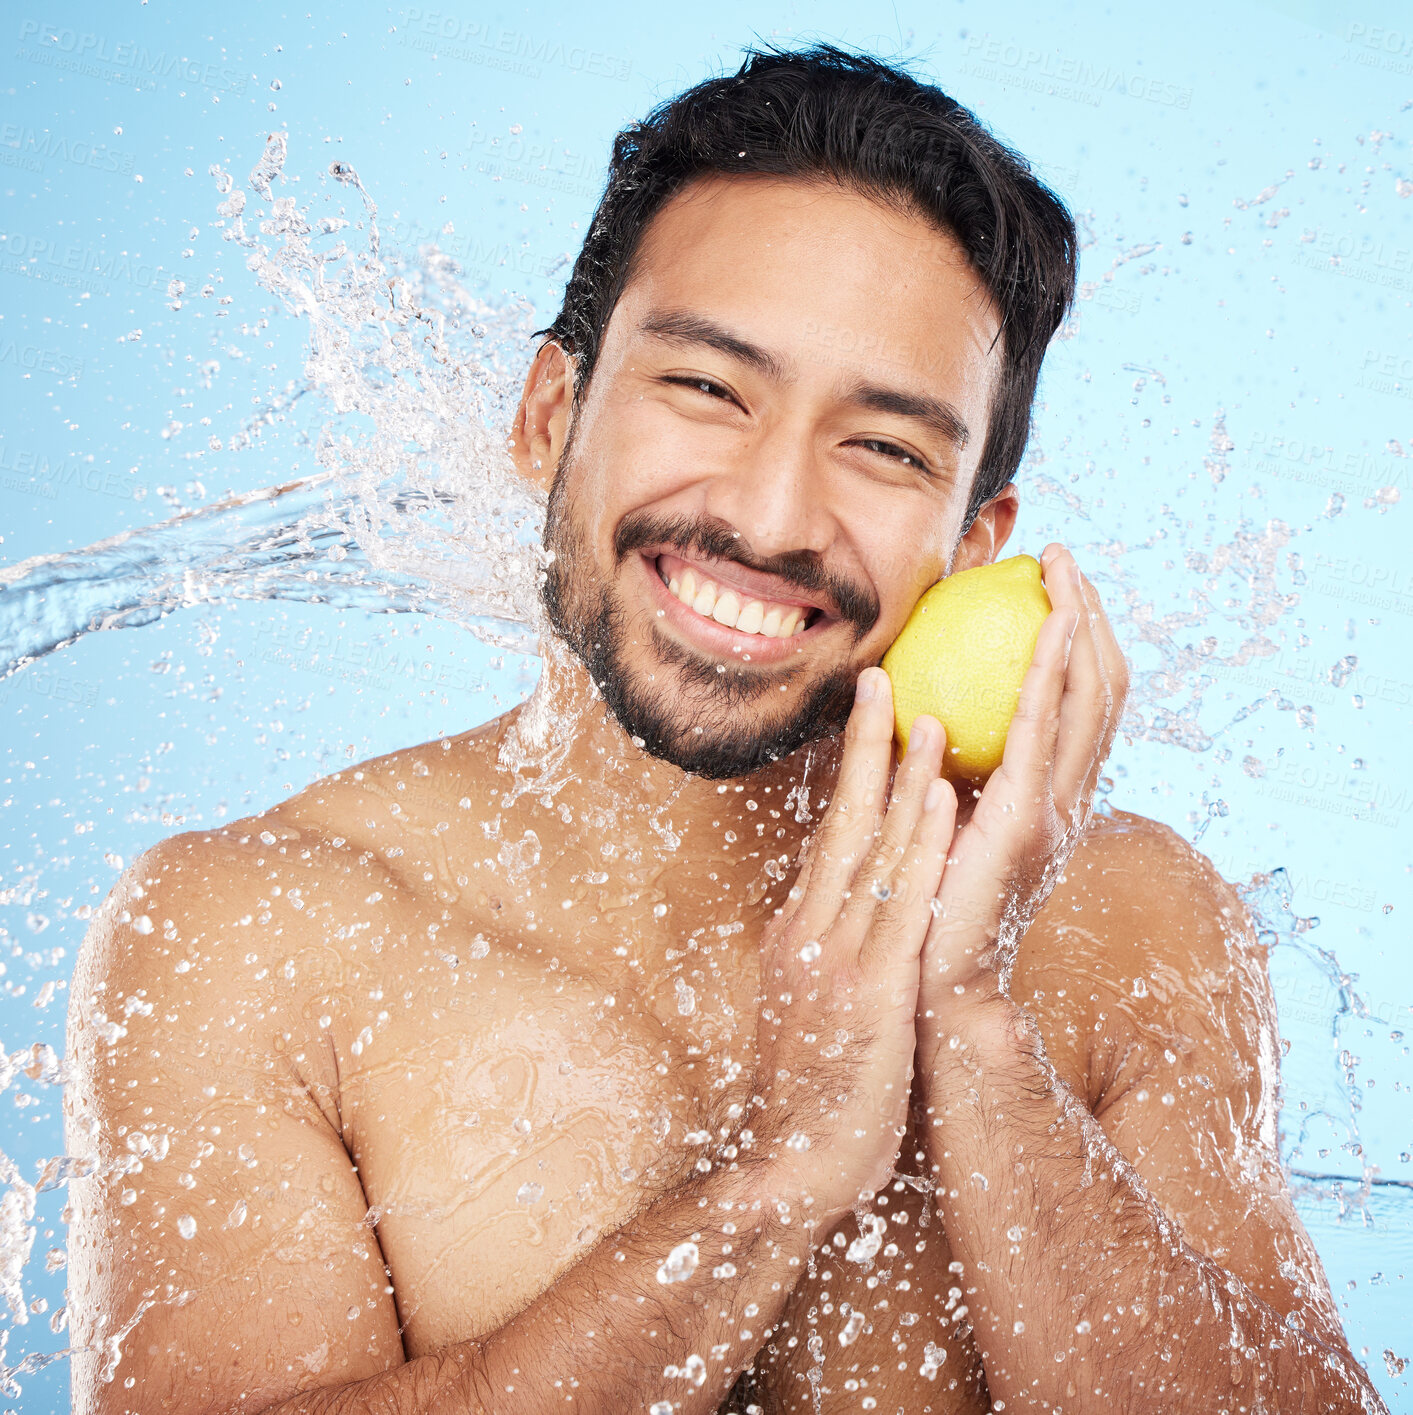 Buy stock photo Skincare, water and portrait of man with a lemon in studio for healthy, organic and natural face routine. Health, wellness and man from India with citrus fruit for facial treatment by blue background